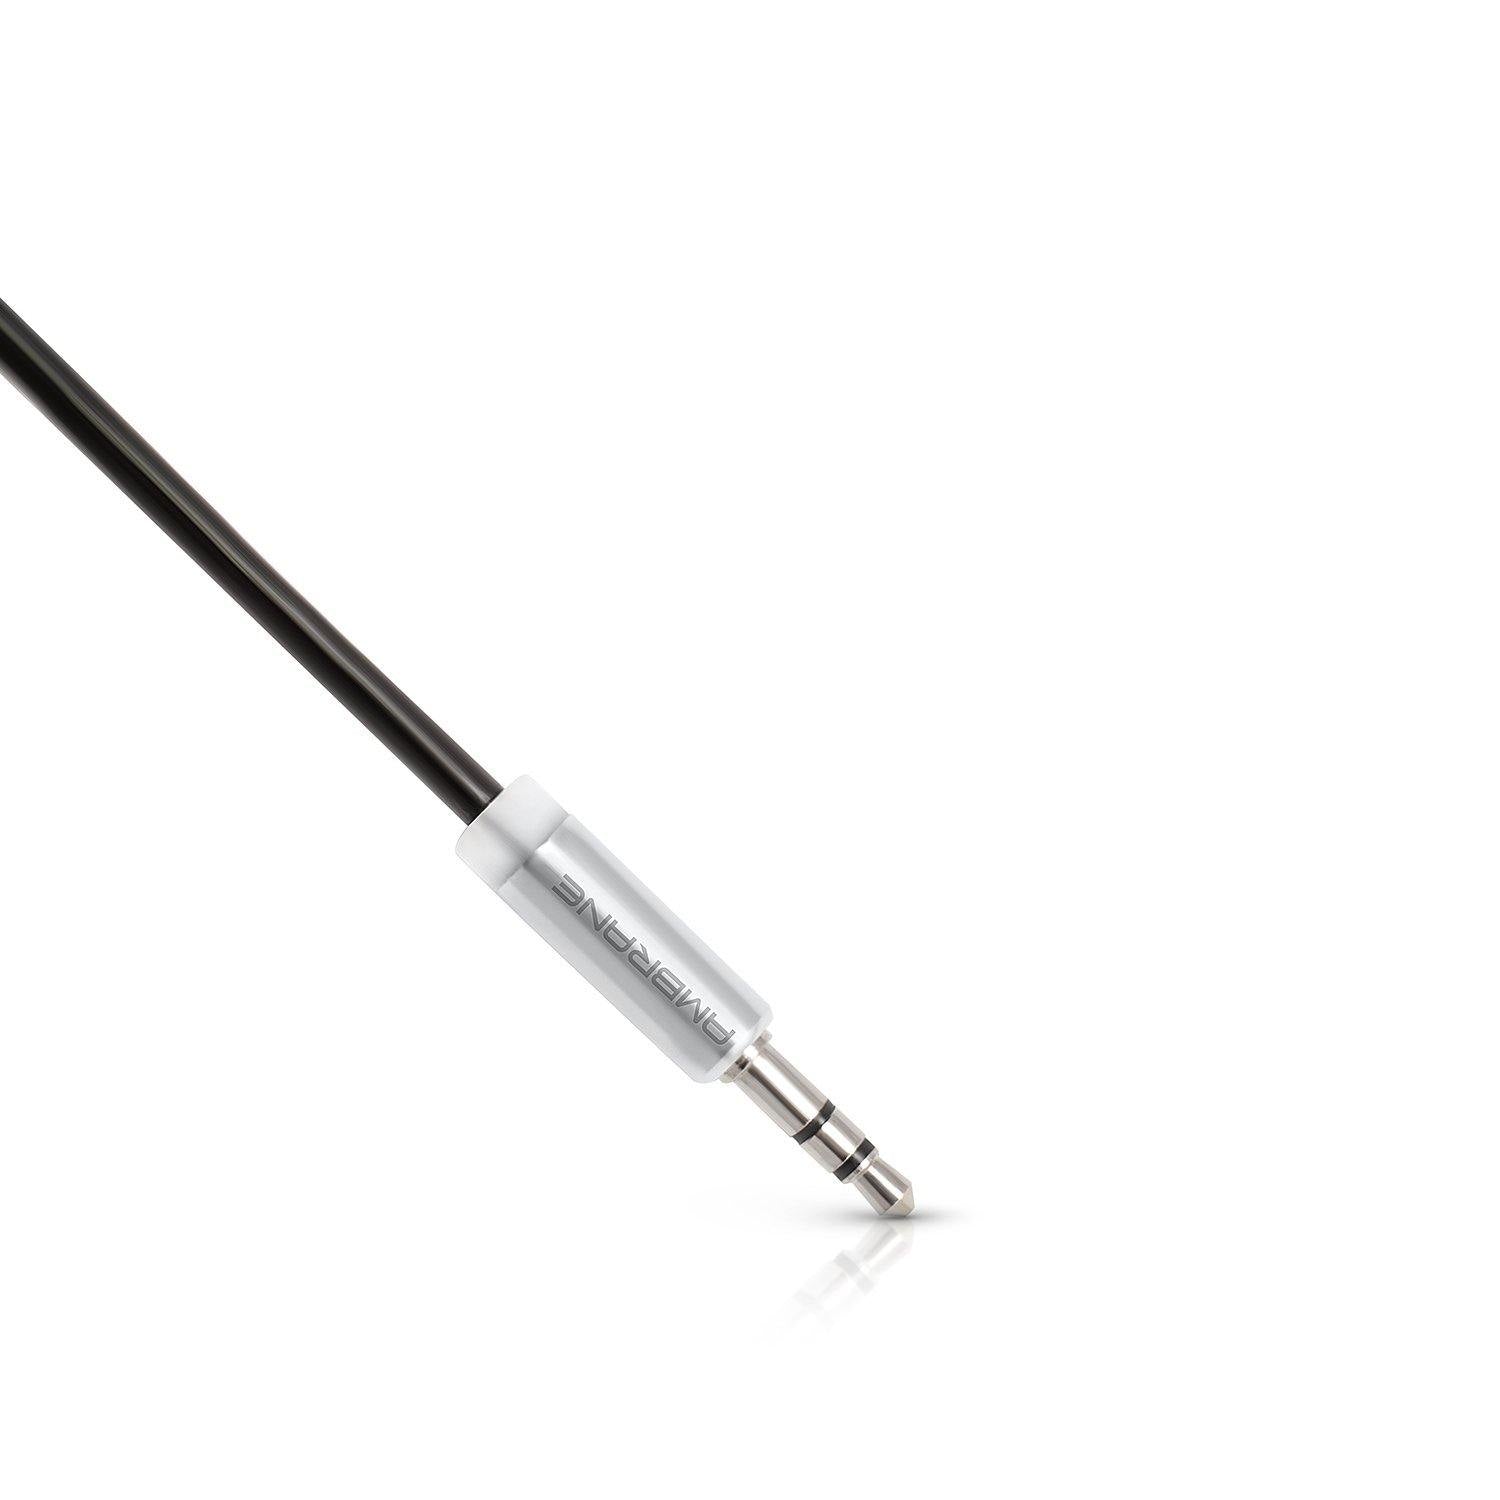 Aux Audio Cable 11 with 3.5mm (Black) - AmbraneIndia